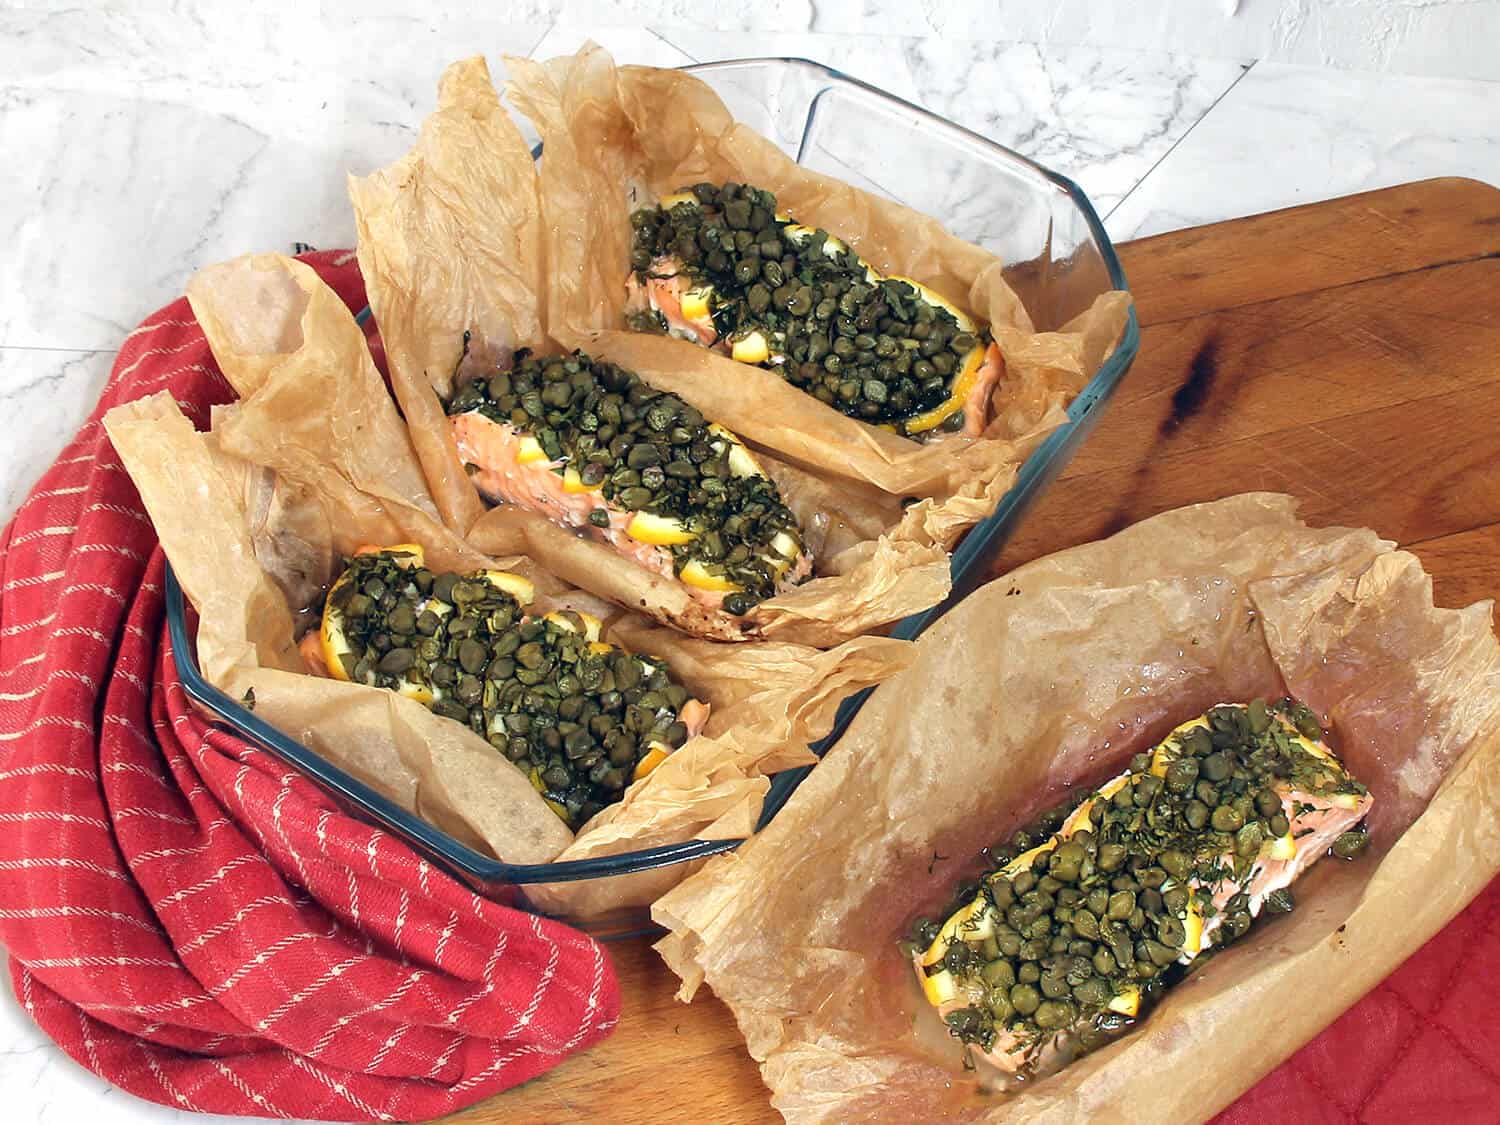 Quick and Easy Baked Salmon en Papilotte with Fresh Herbs and Capers